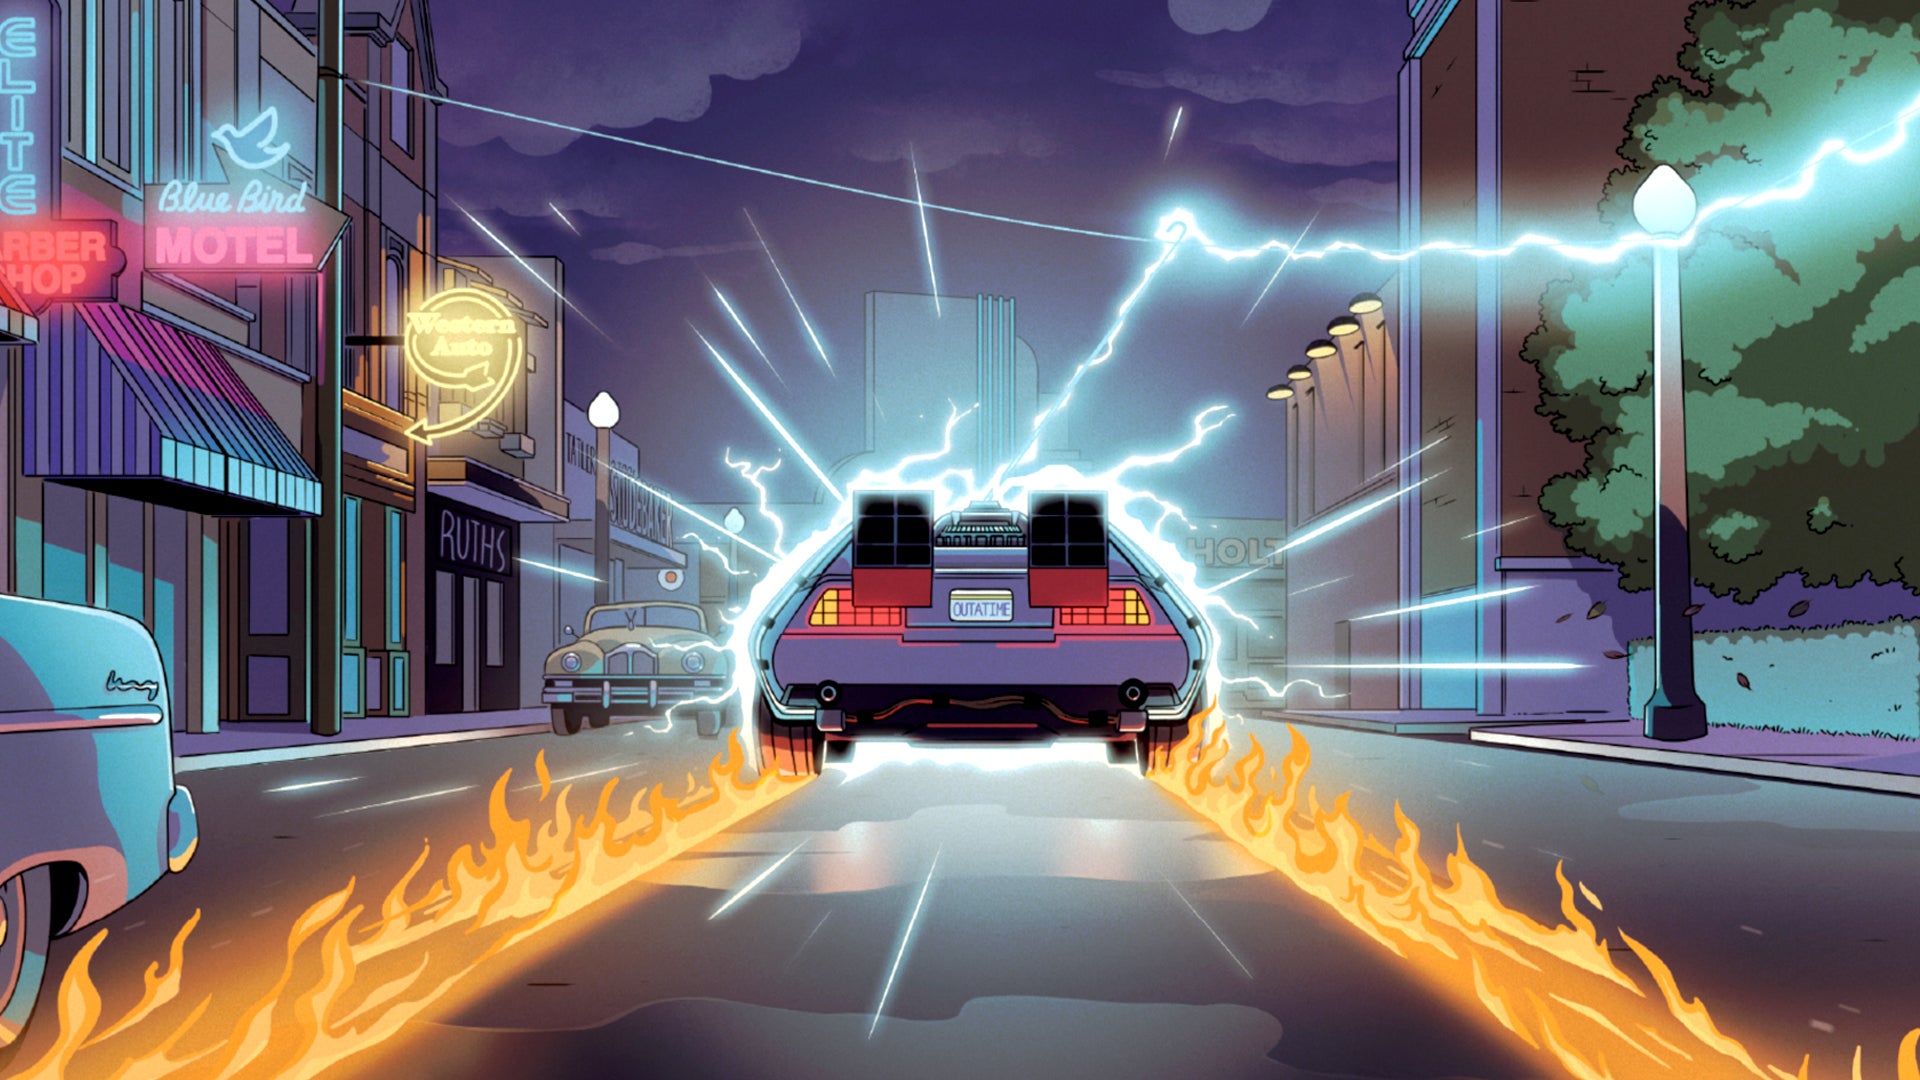 Funko Games announce Back to the Future: Back in Time board game, coming this year